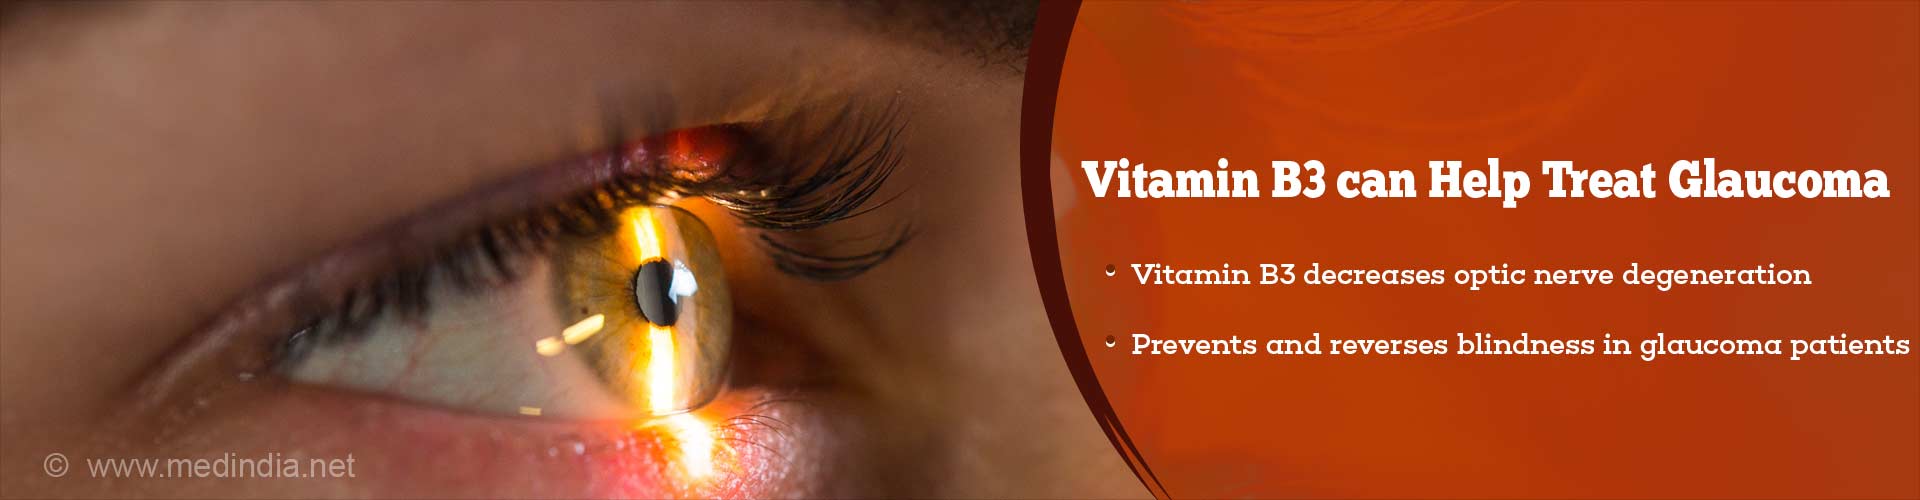 vitamin b3 can help treat glaucoma
- vitamin b3 decreases optic nerve degeneration
- prevents and reverses blindness in glaucoma patients